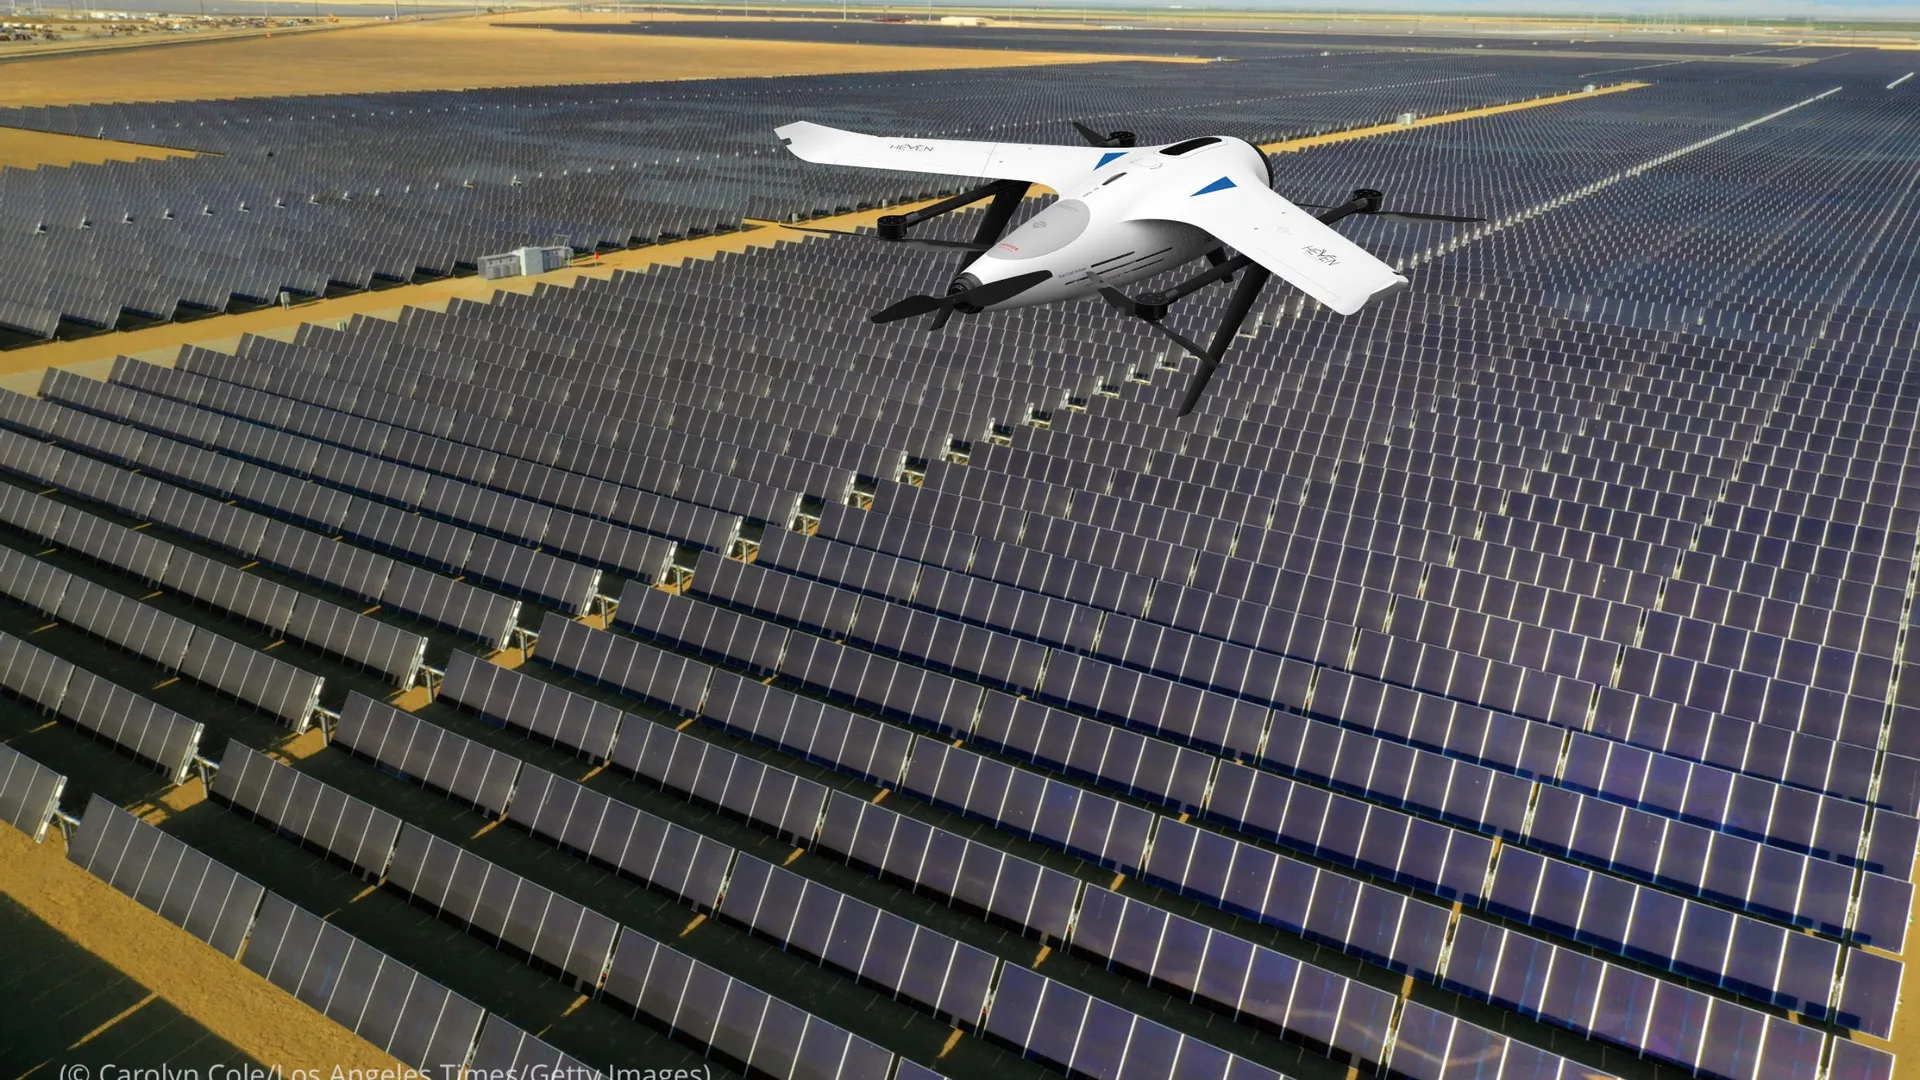 Hydrogen-powered drones could fly longer, farther